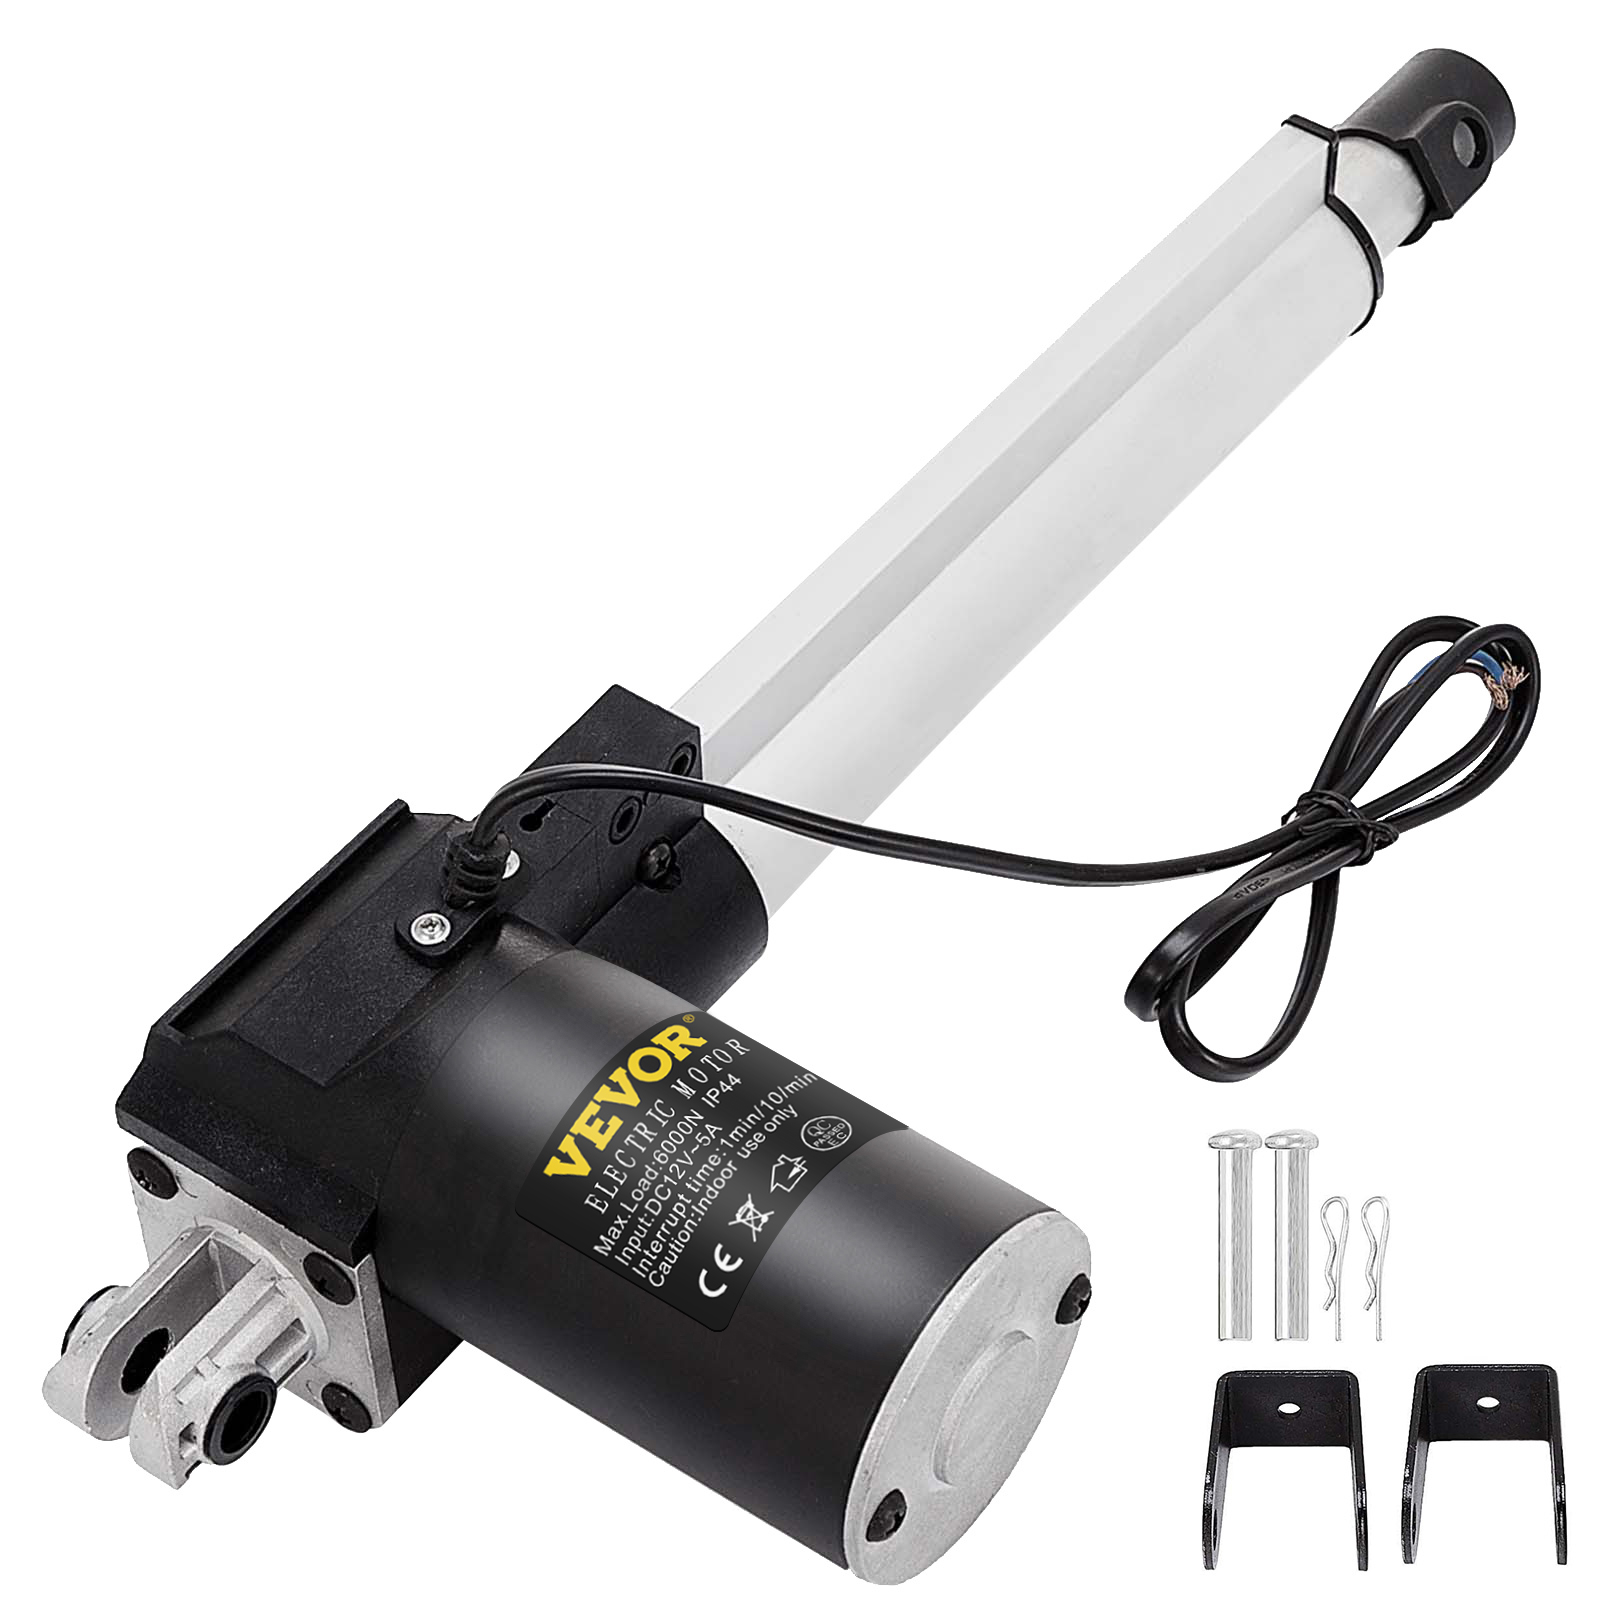 Details about   6"-20" Inch Stroke Linear Actuator 1320LB/6000N Pound Max Lift 12V Volt DC Motor 